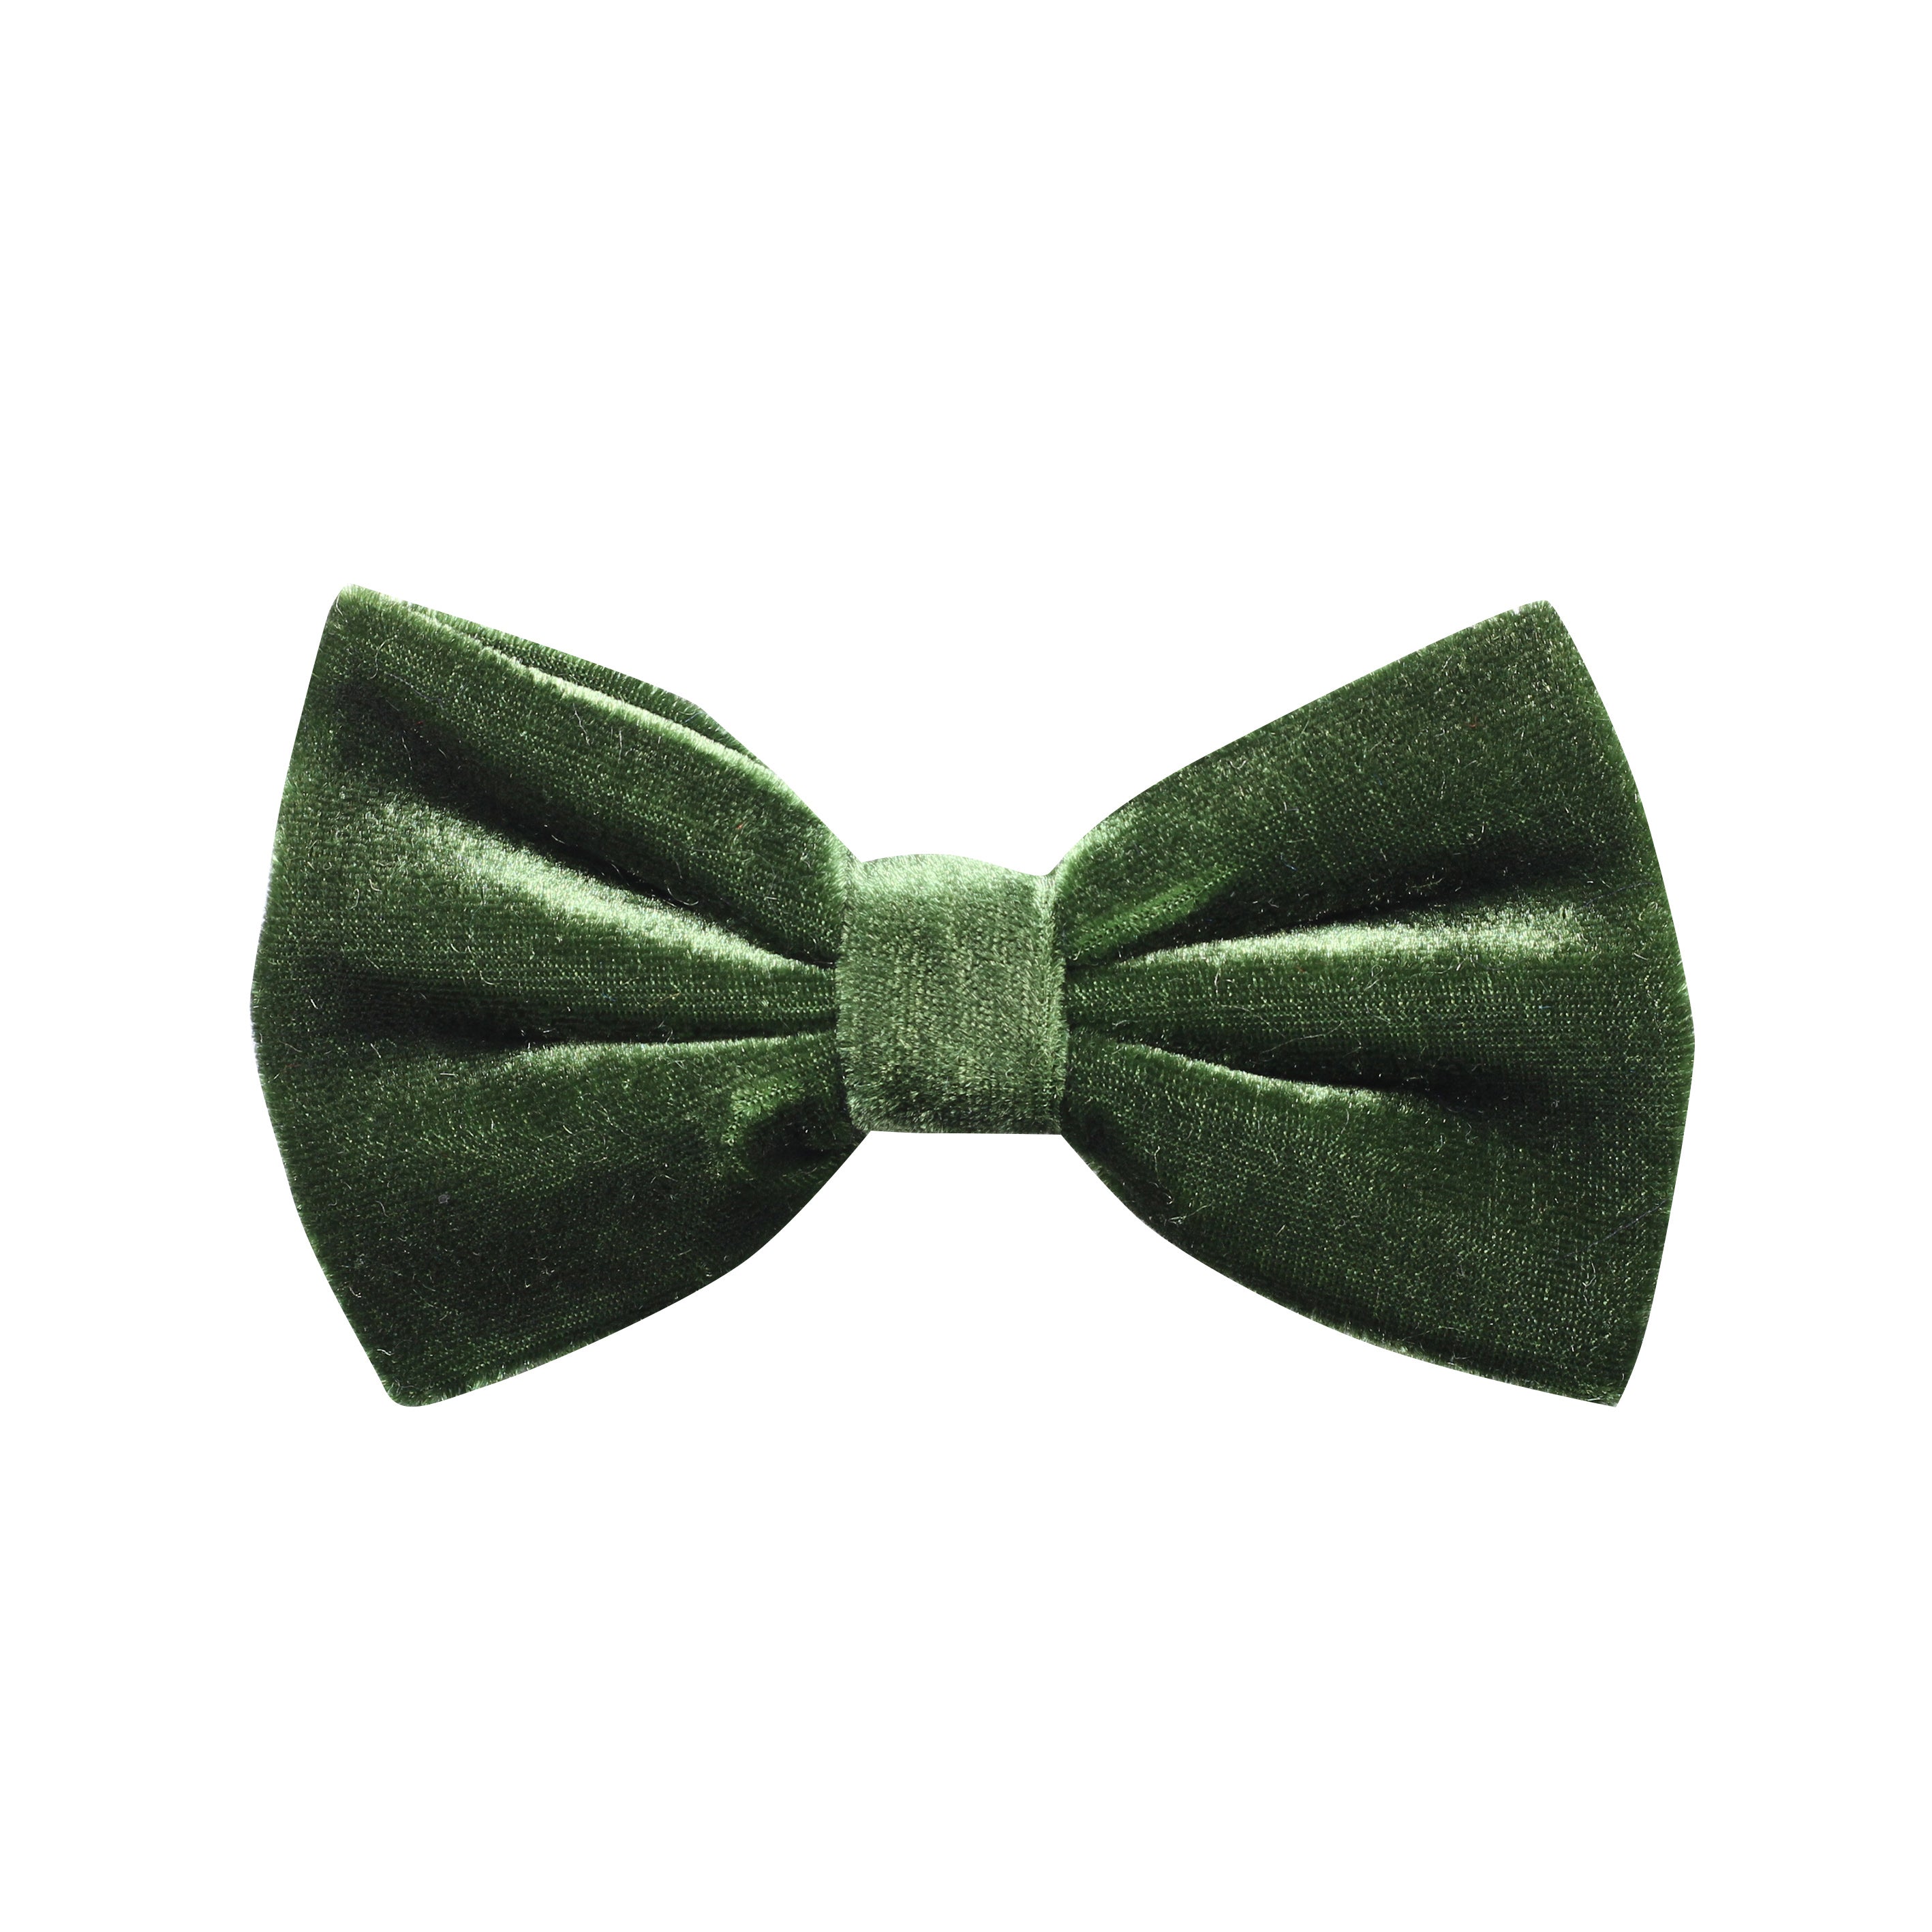 Green Shiny Velvet Bow Tie With Cufflink Pocket Square